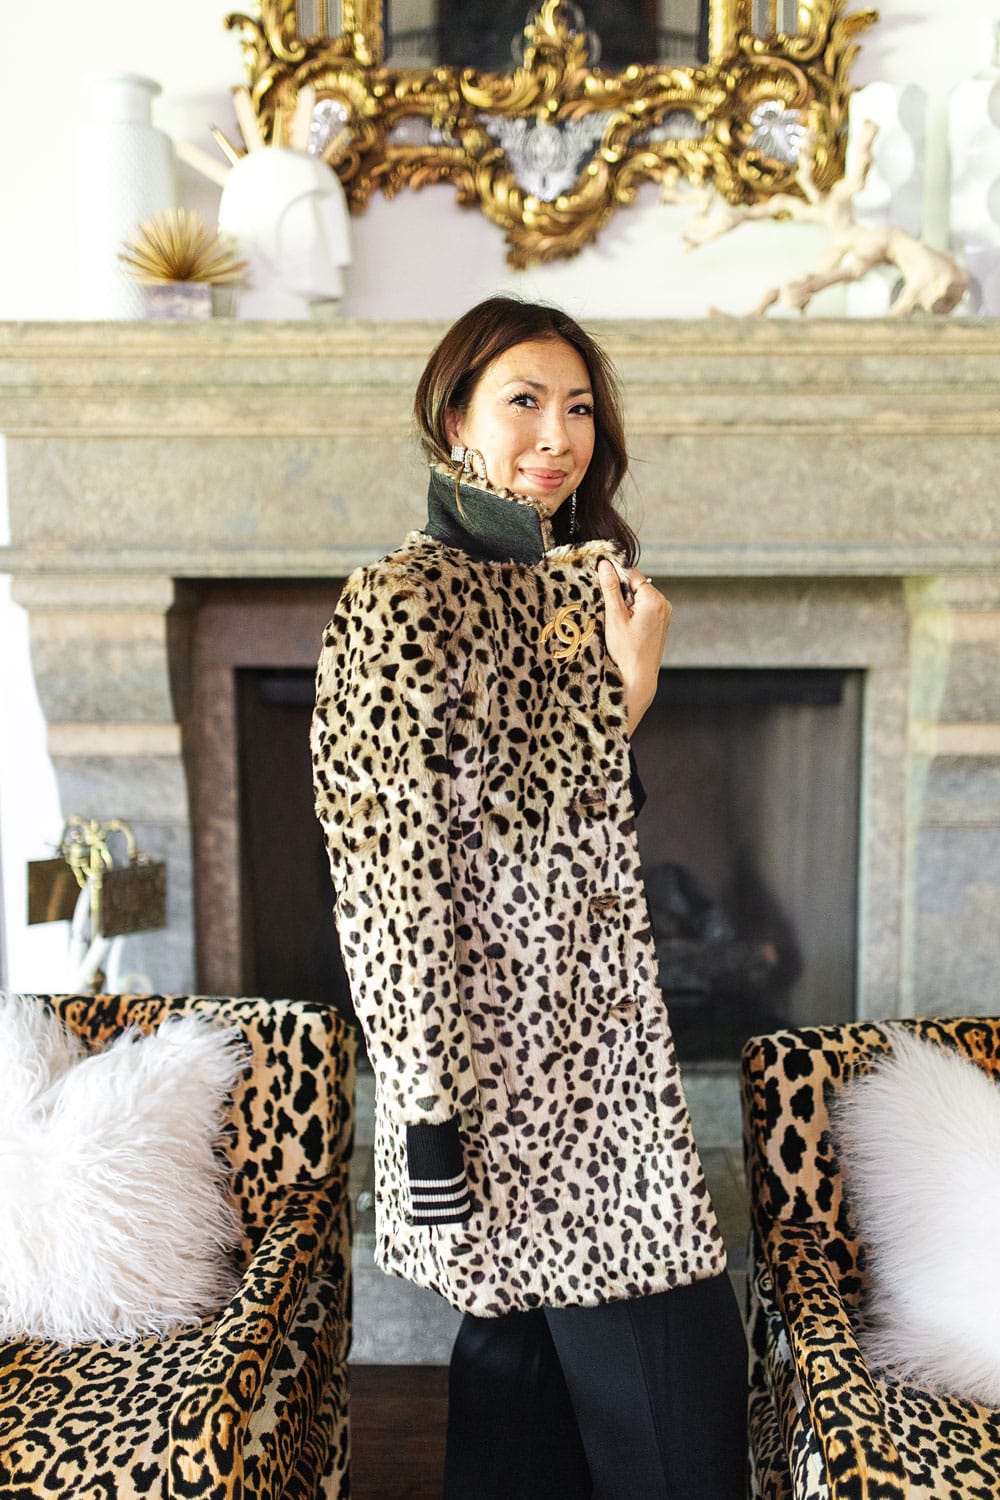 style of sam in cabi josephine leopard coat at home with leopard parson chairs